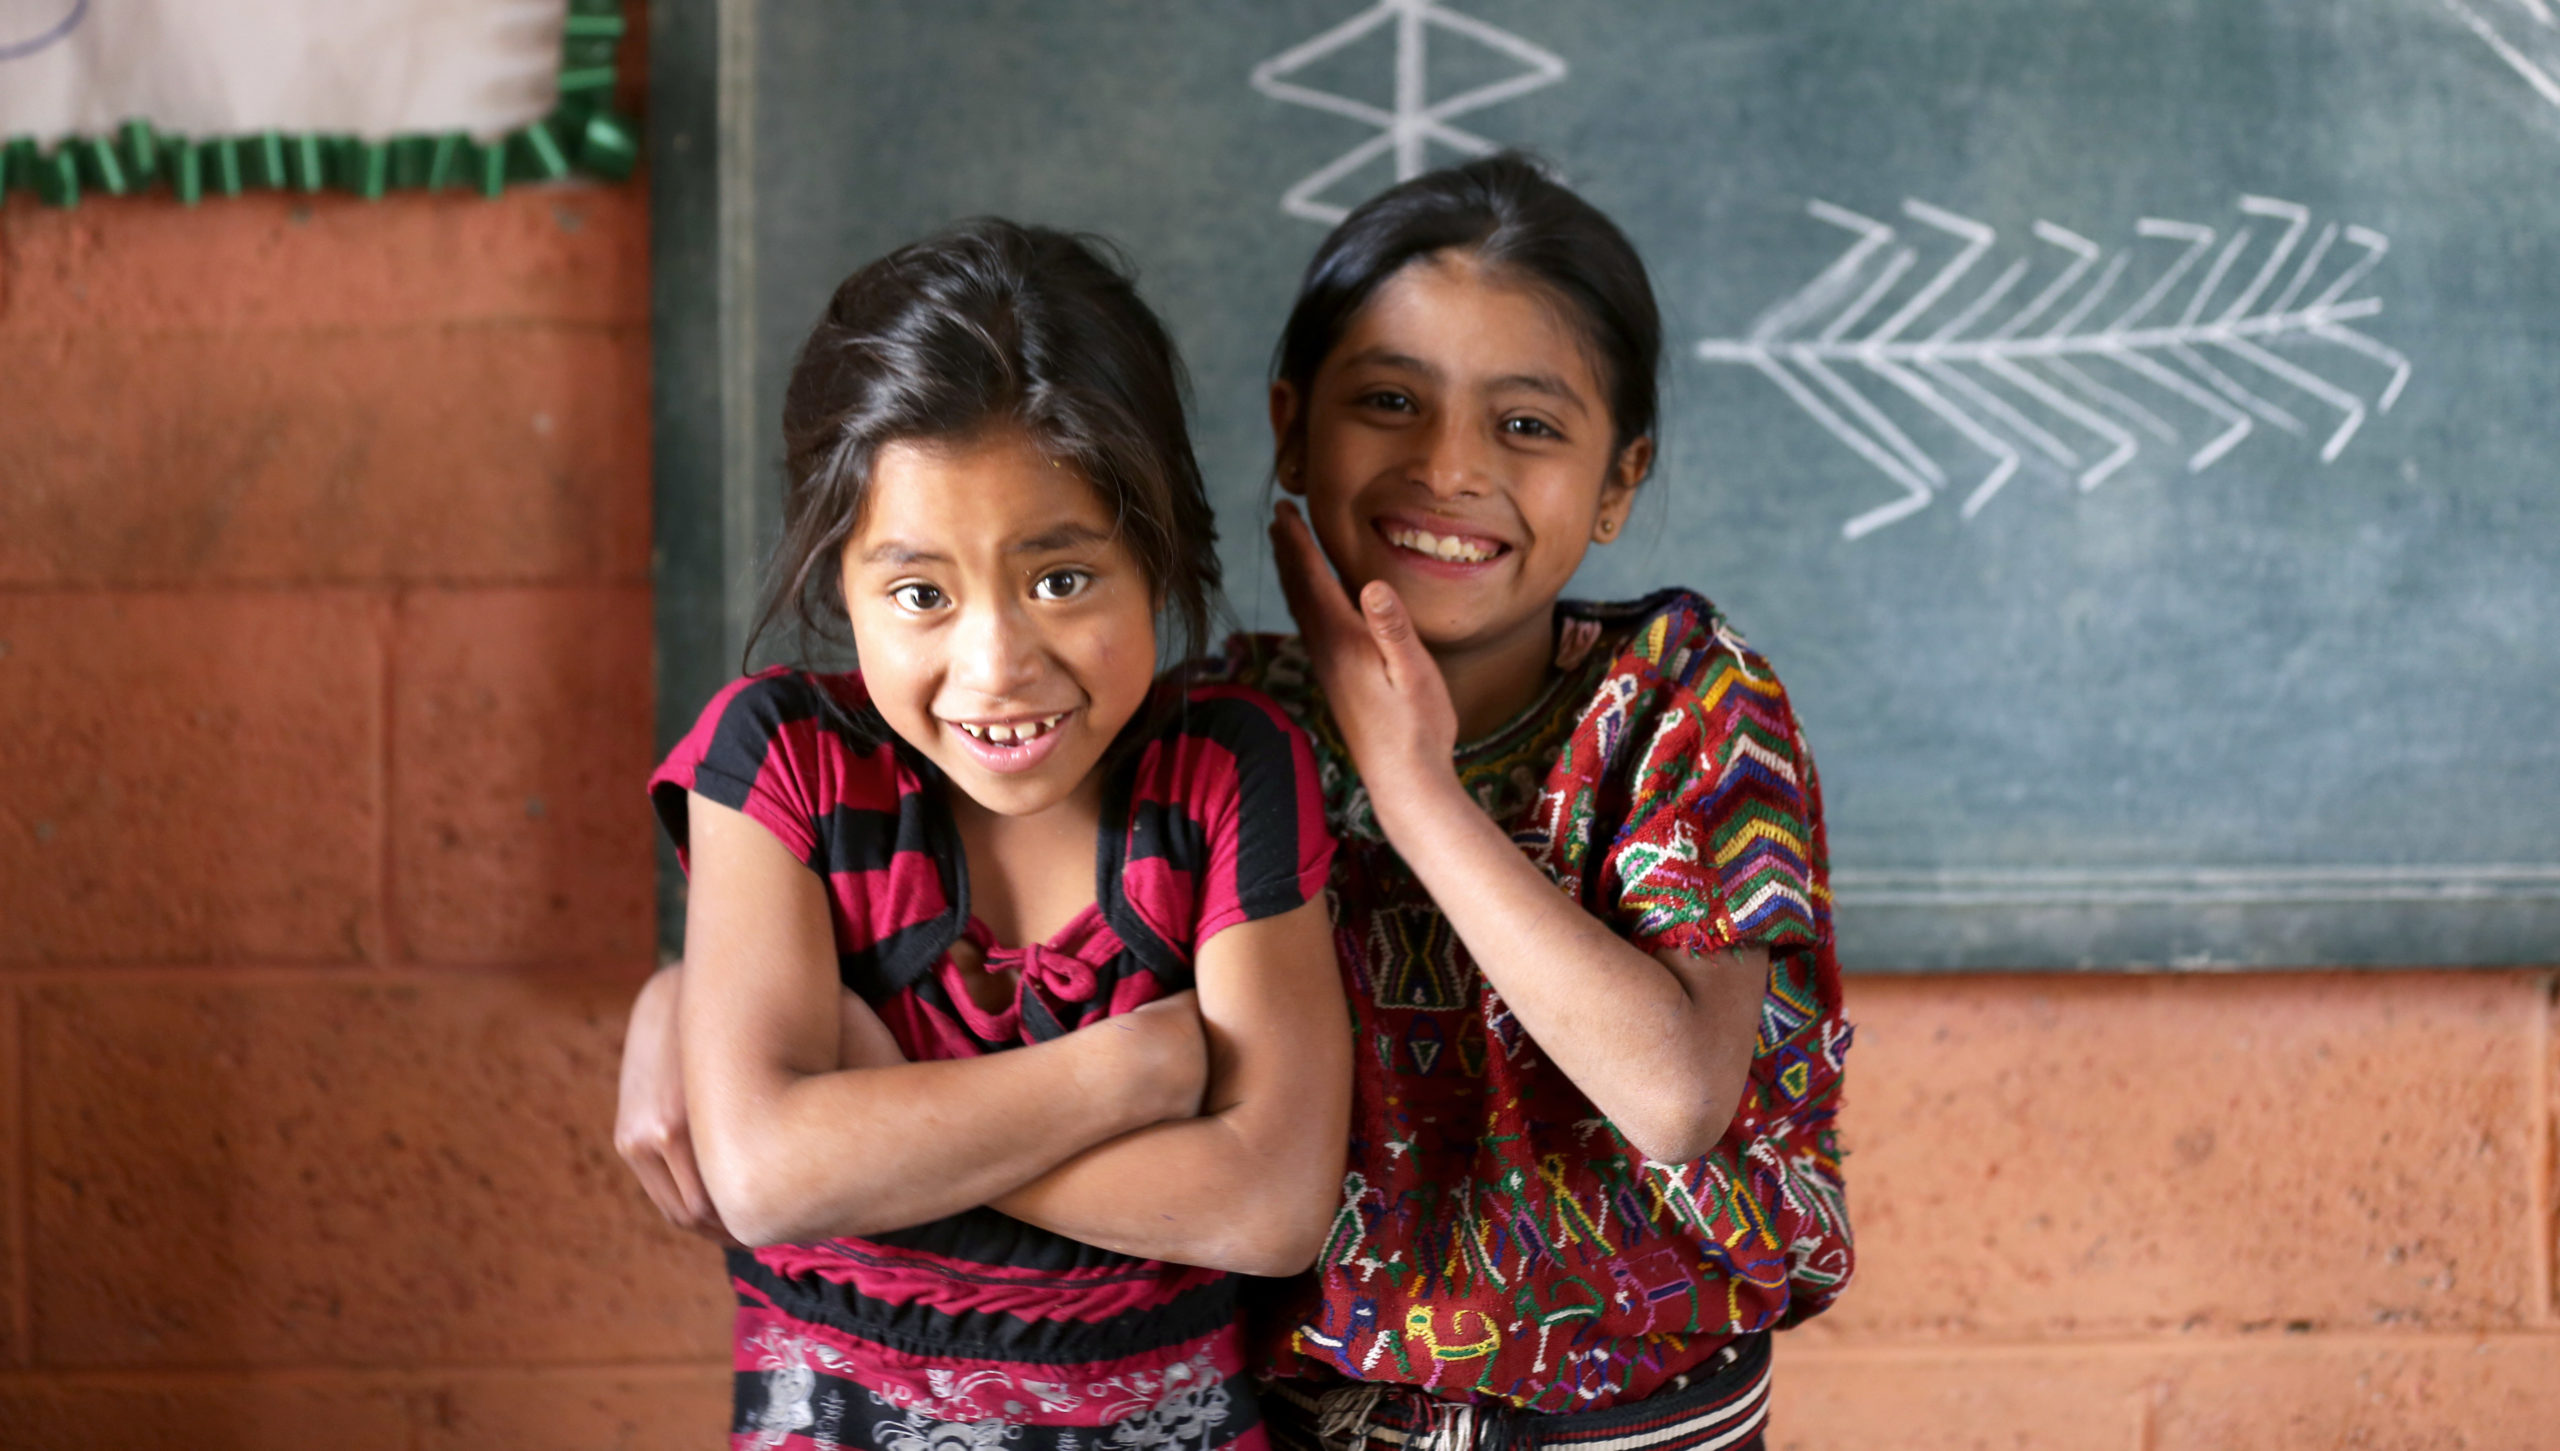 Two students in Guatemala stand in front of a blackboard inside a classroom.